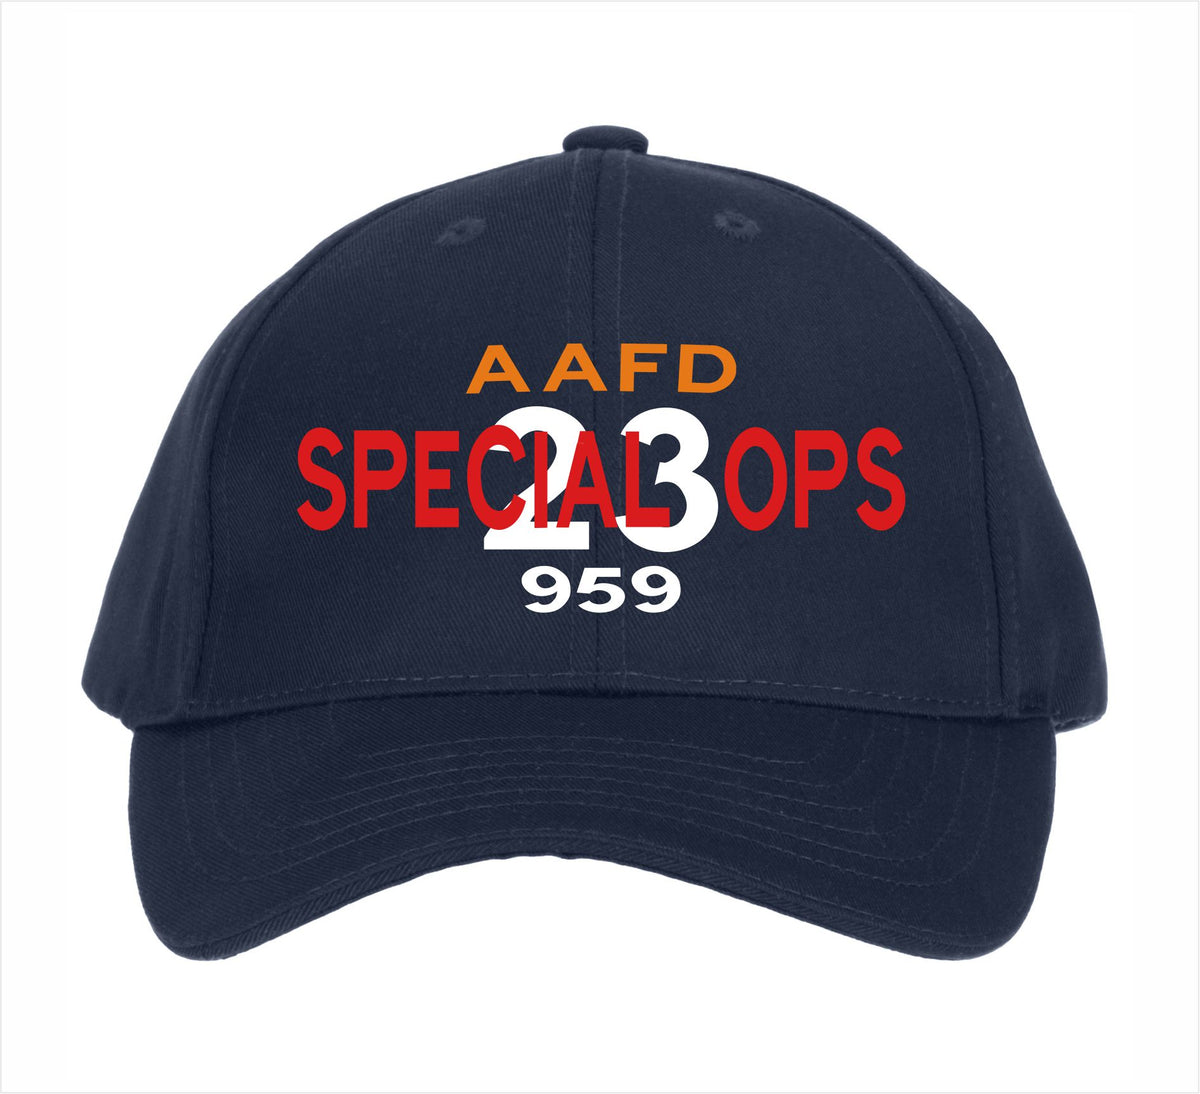 AAFD Special Ops Custom Embroidered Hat